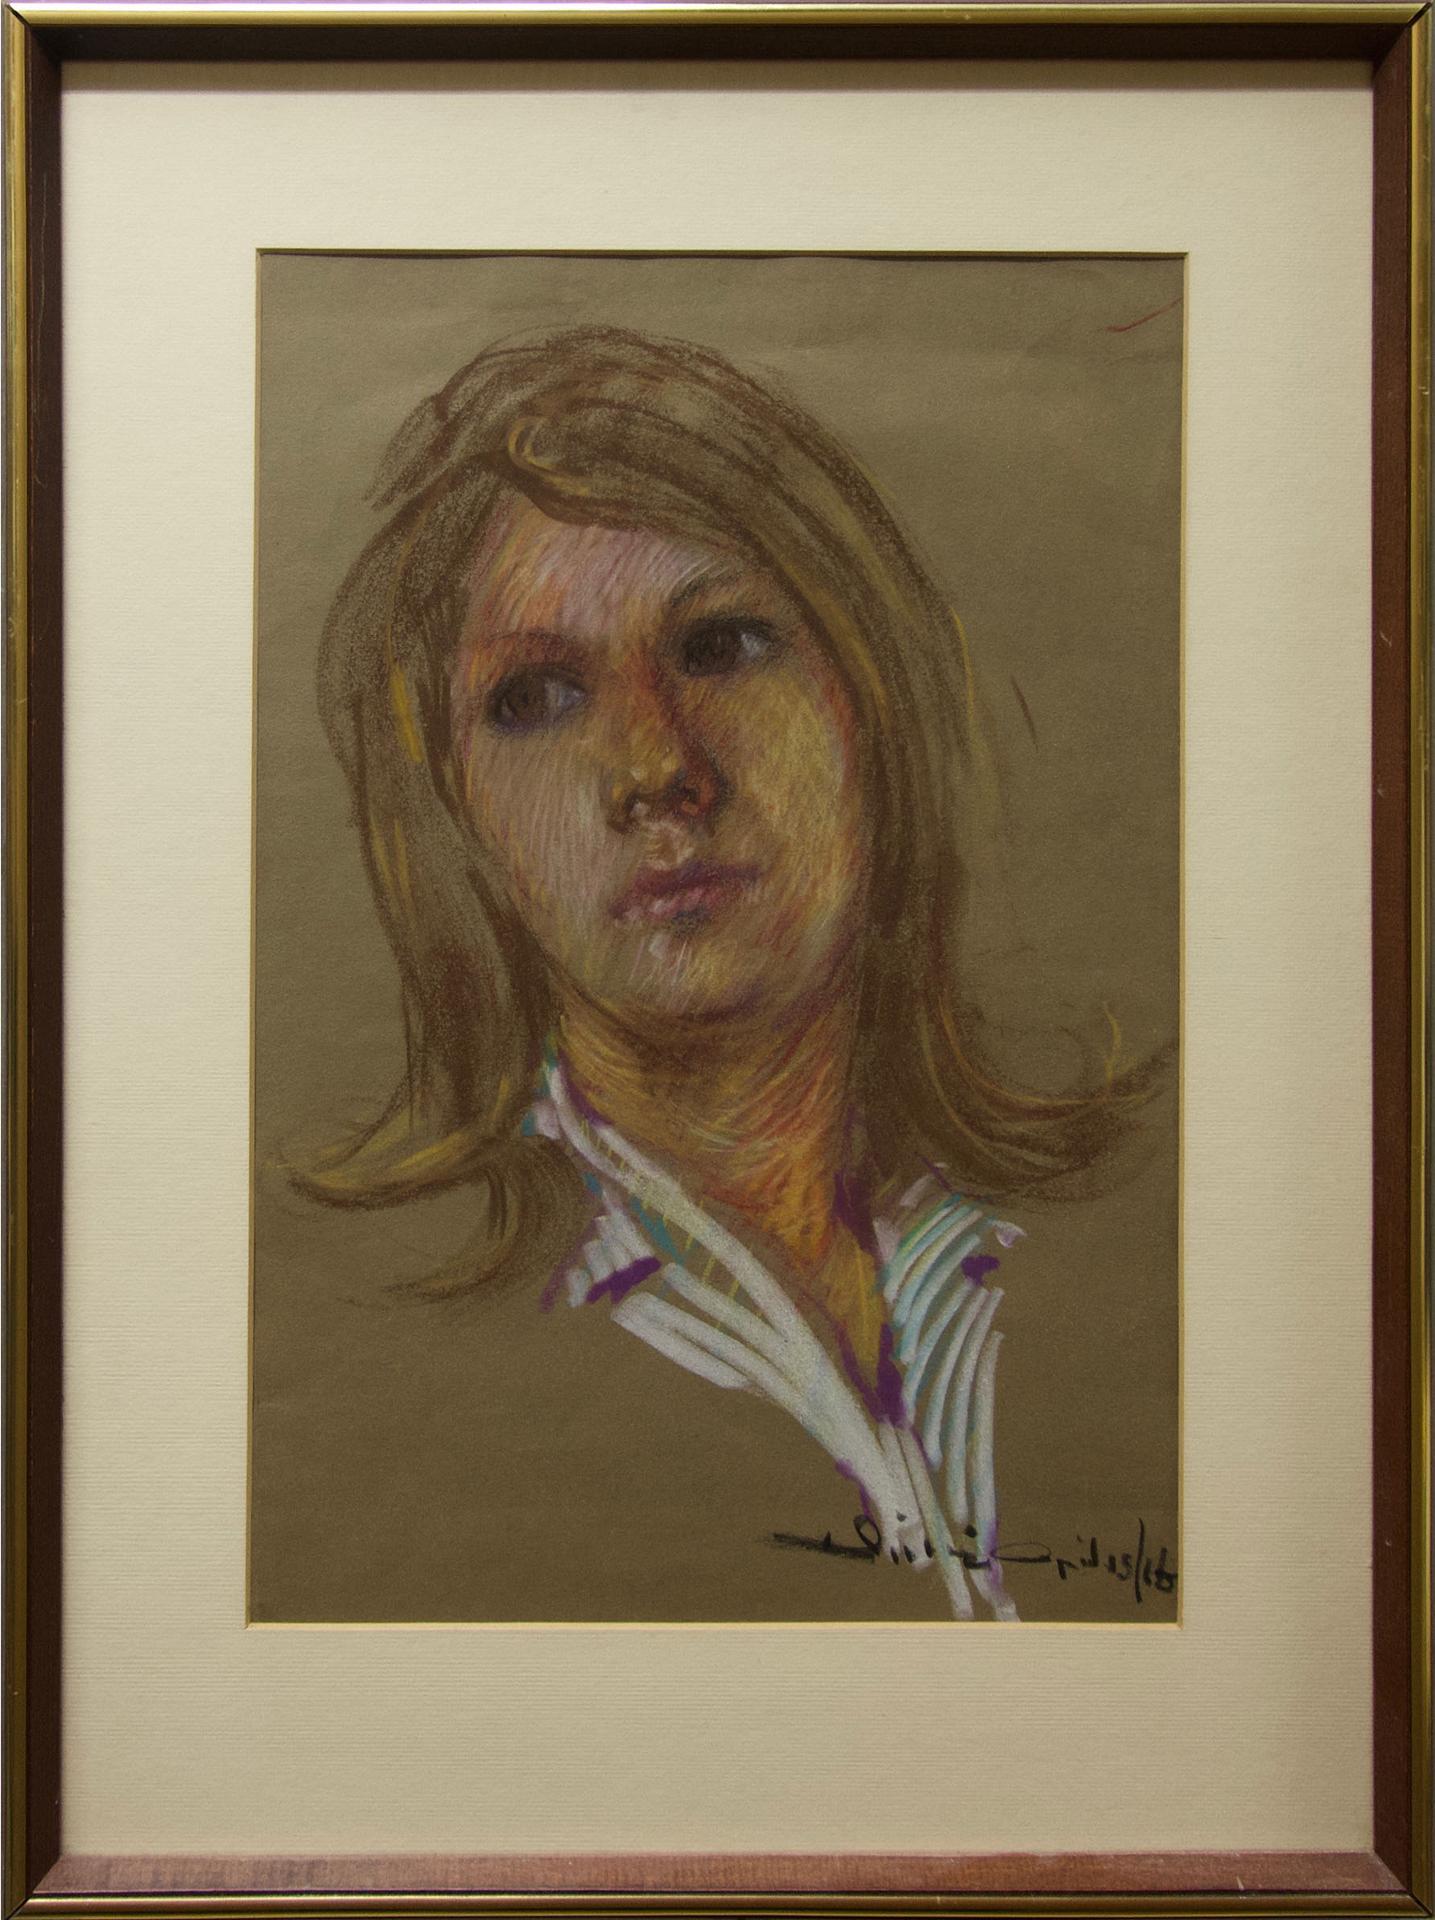 Arthur Shilling (1941-1986) - Untitled (Portrait Of The Artist's Wife Millie)